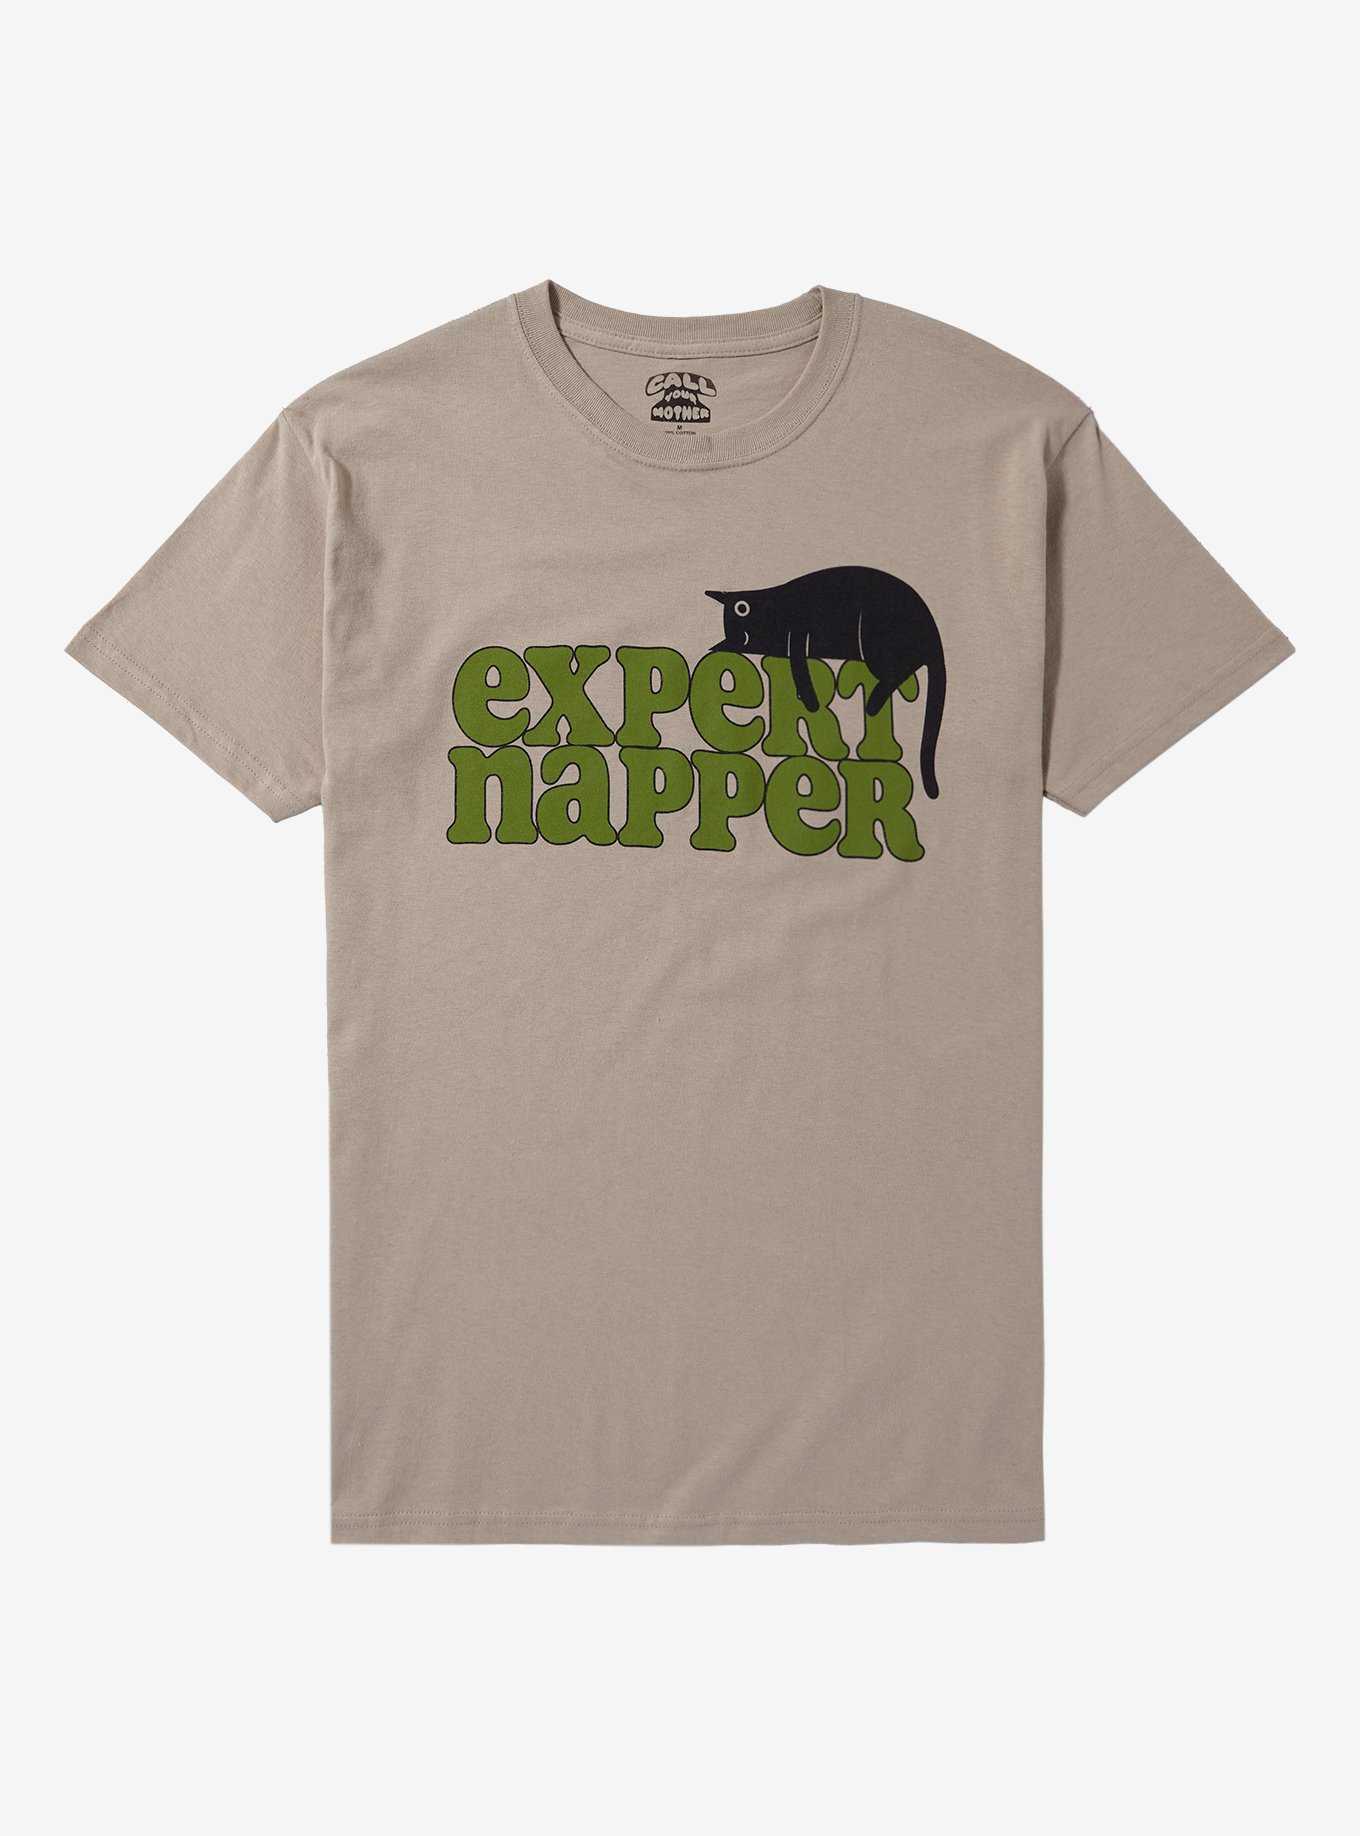 Expert Napper T-Shirt By Call Your Mother, , hi-res